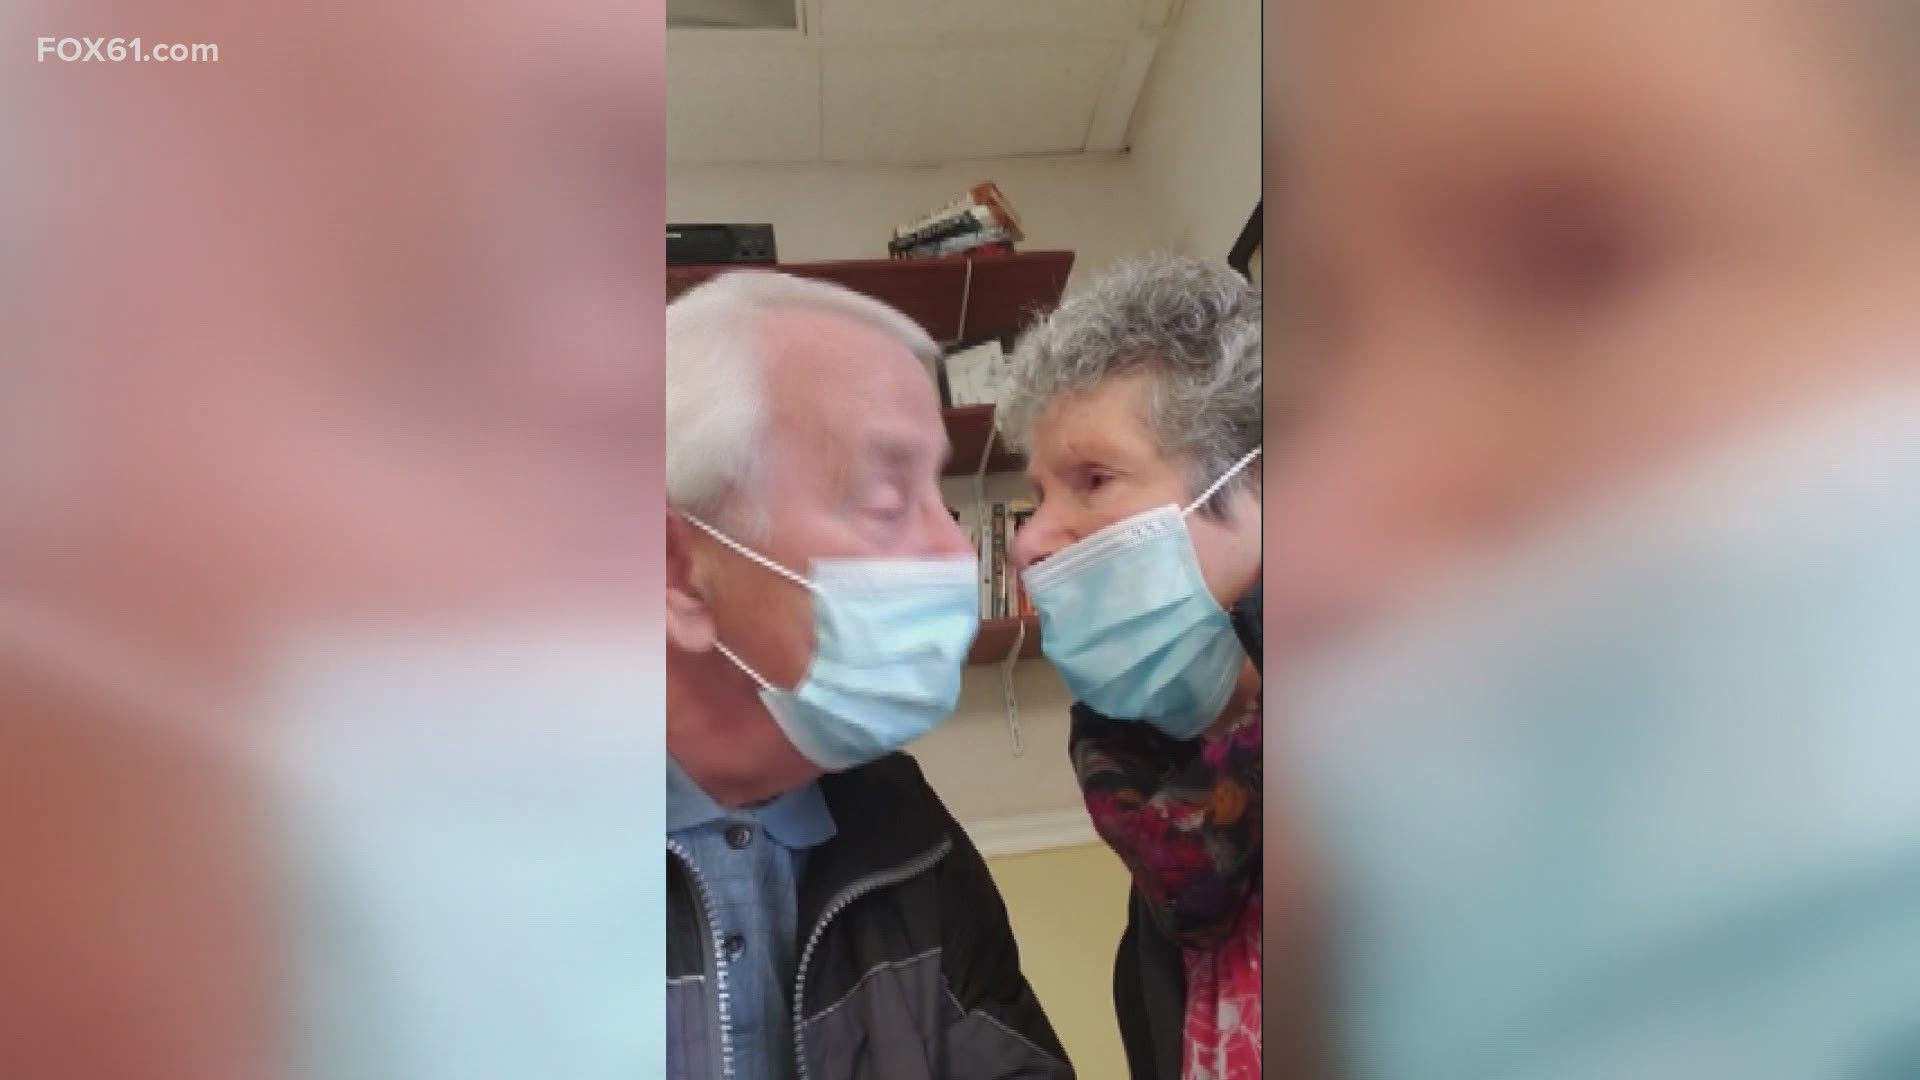 Not since 2020, has the husband been able to visit his wife of 53-years because she was in a nursing home. He sent videos of him singing to her as a way to cope.